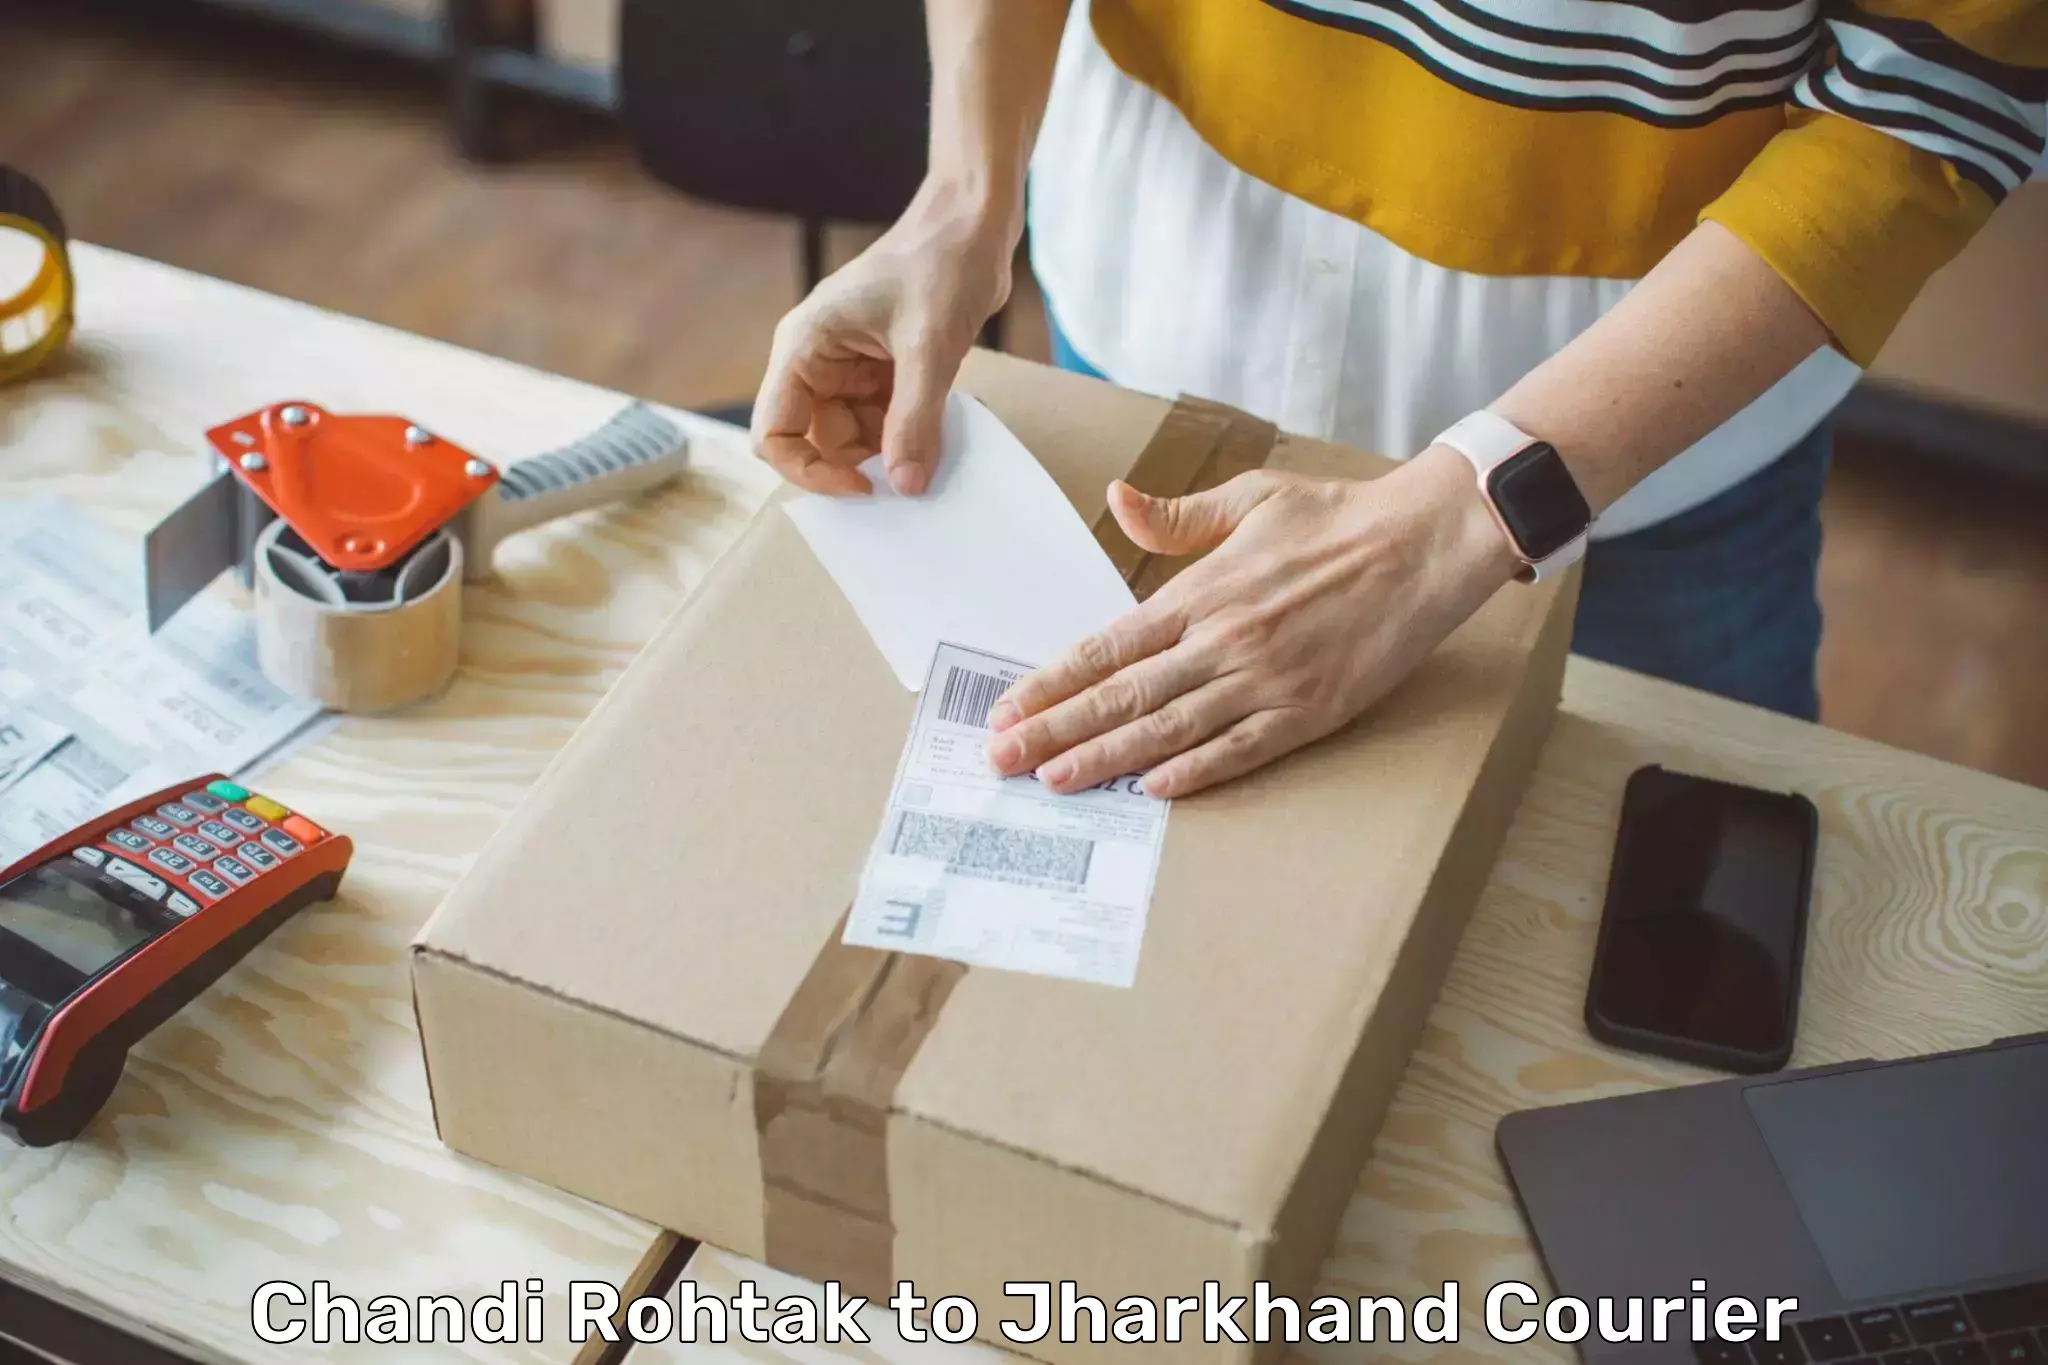 State-of-the-art courier technology Chandi Rohtak to Jharkhand